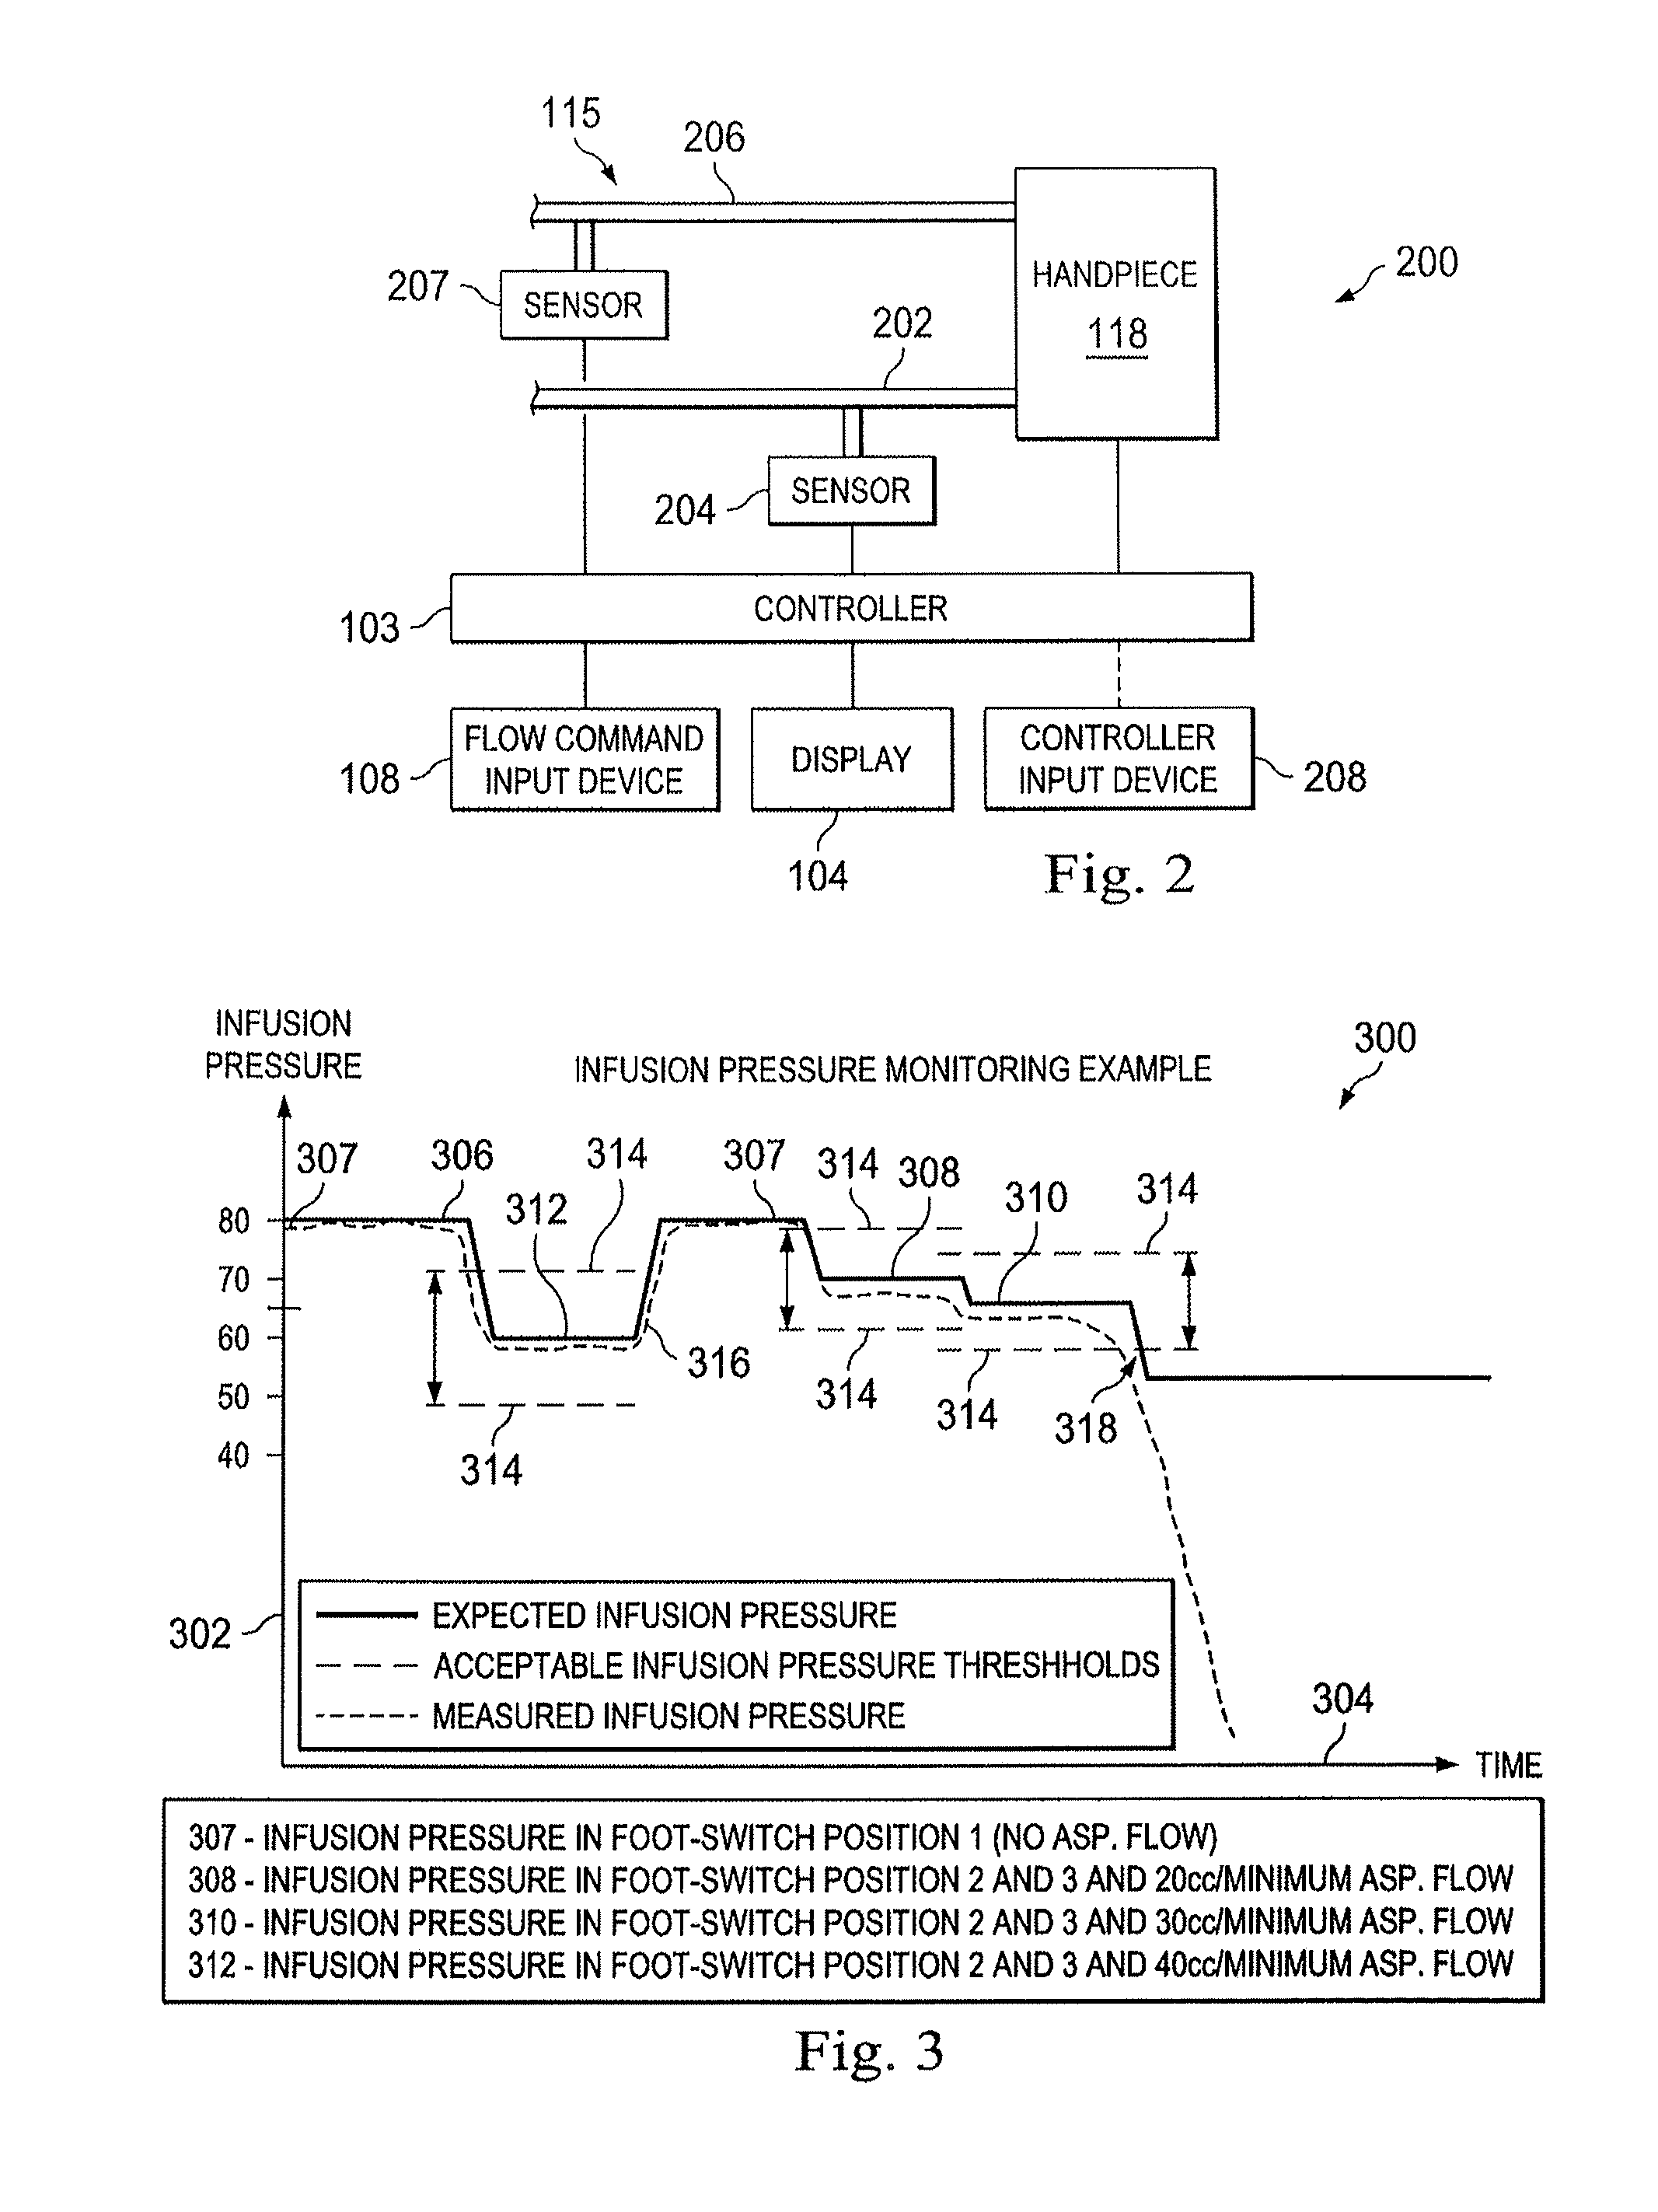 Infusion Pressure Monitoring System